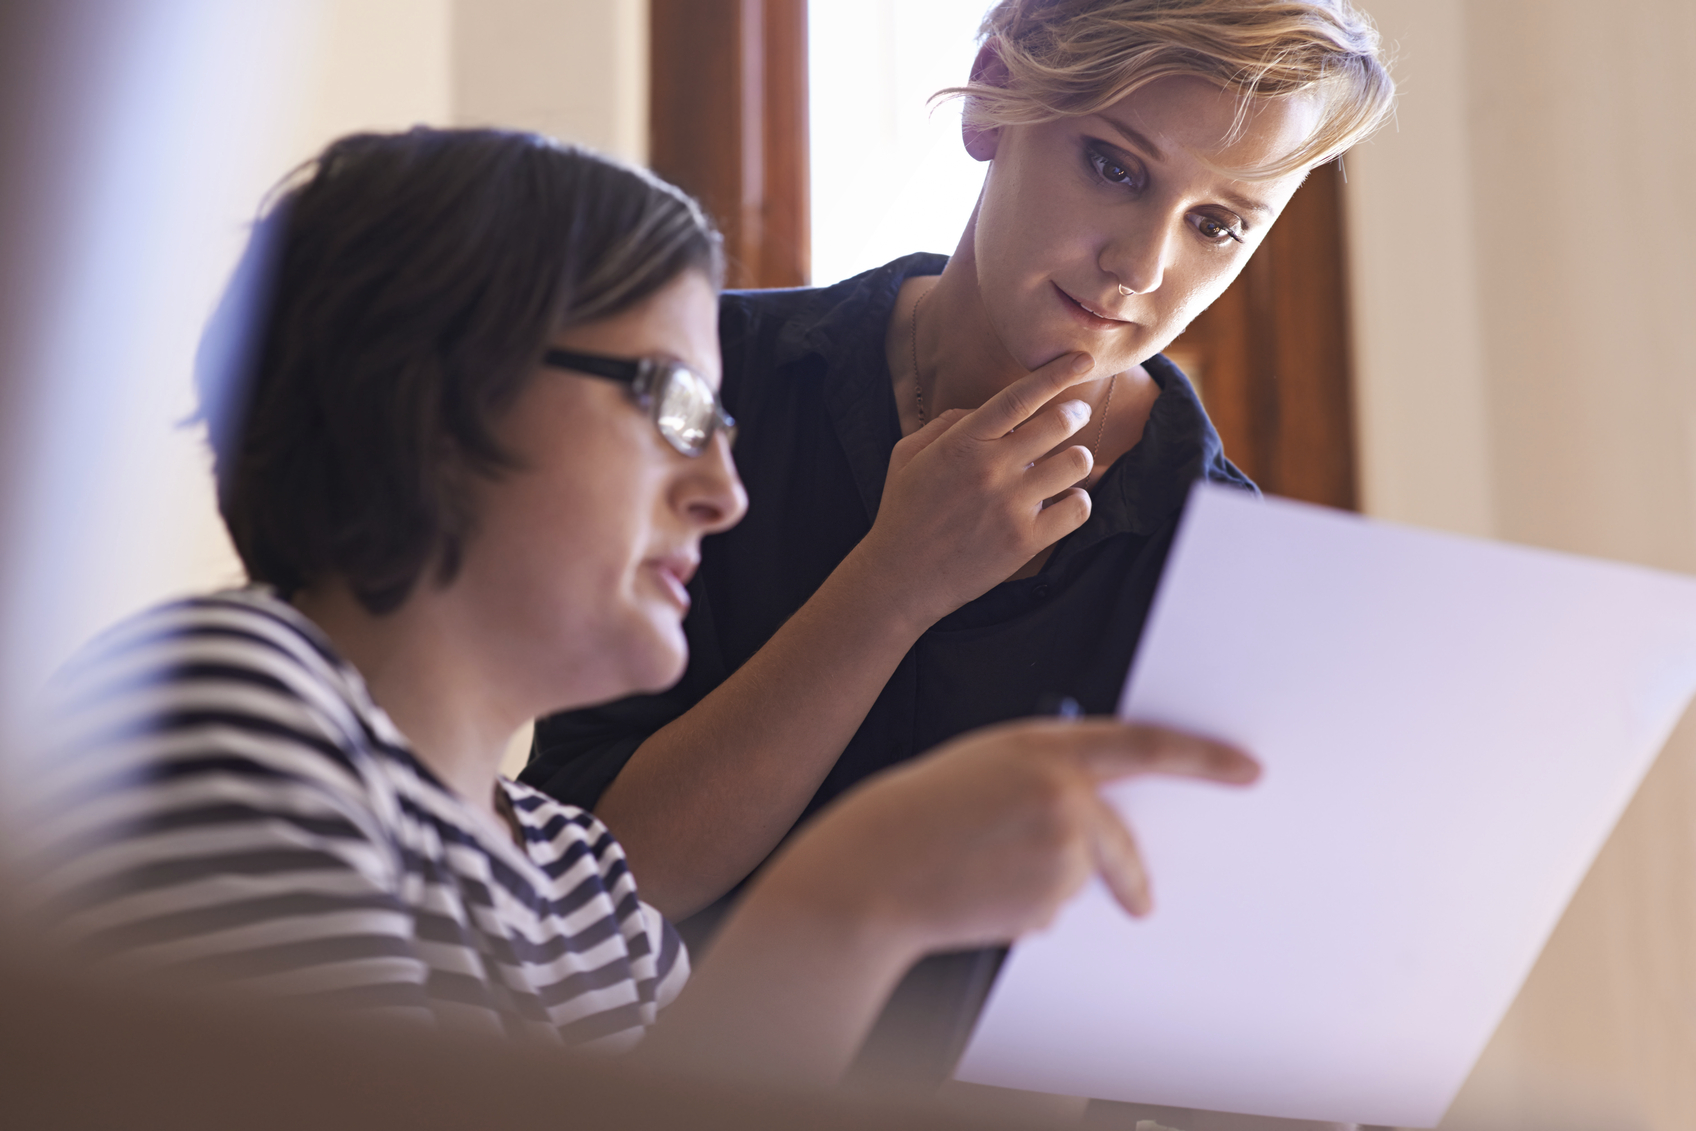 A cropped shot of two women working together in a home office